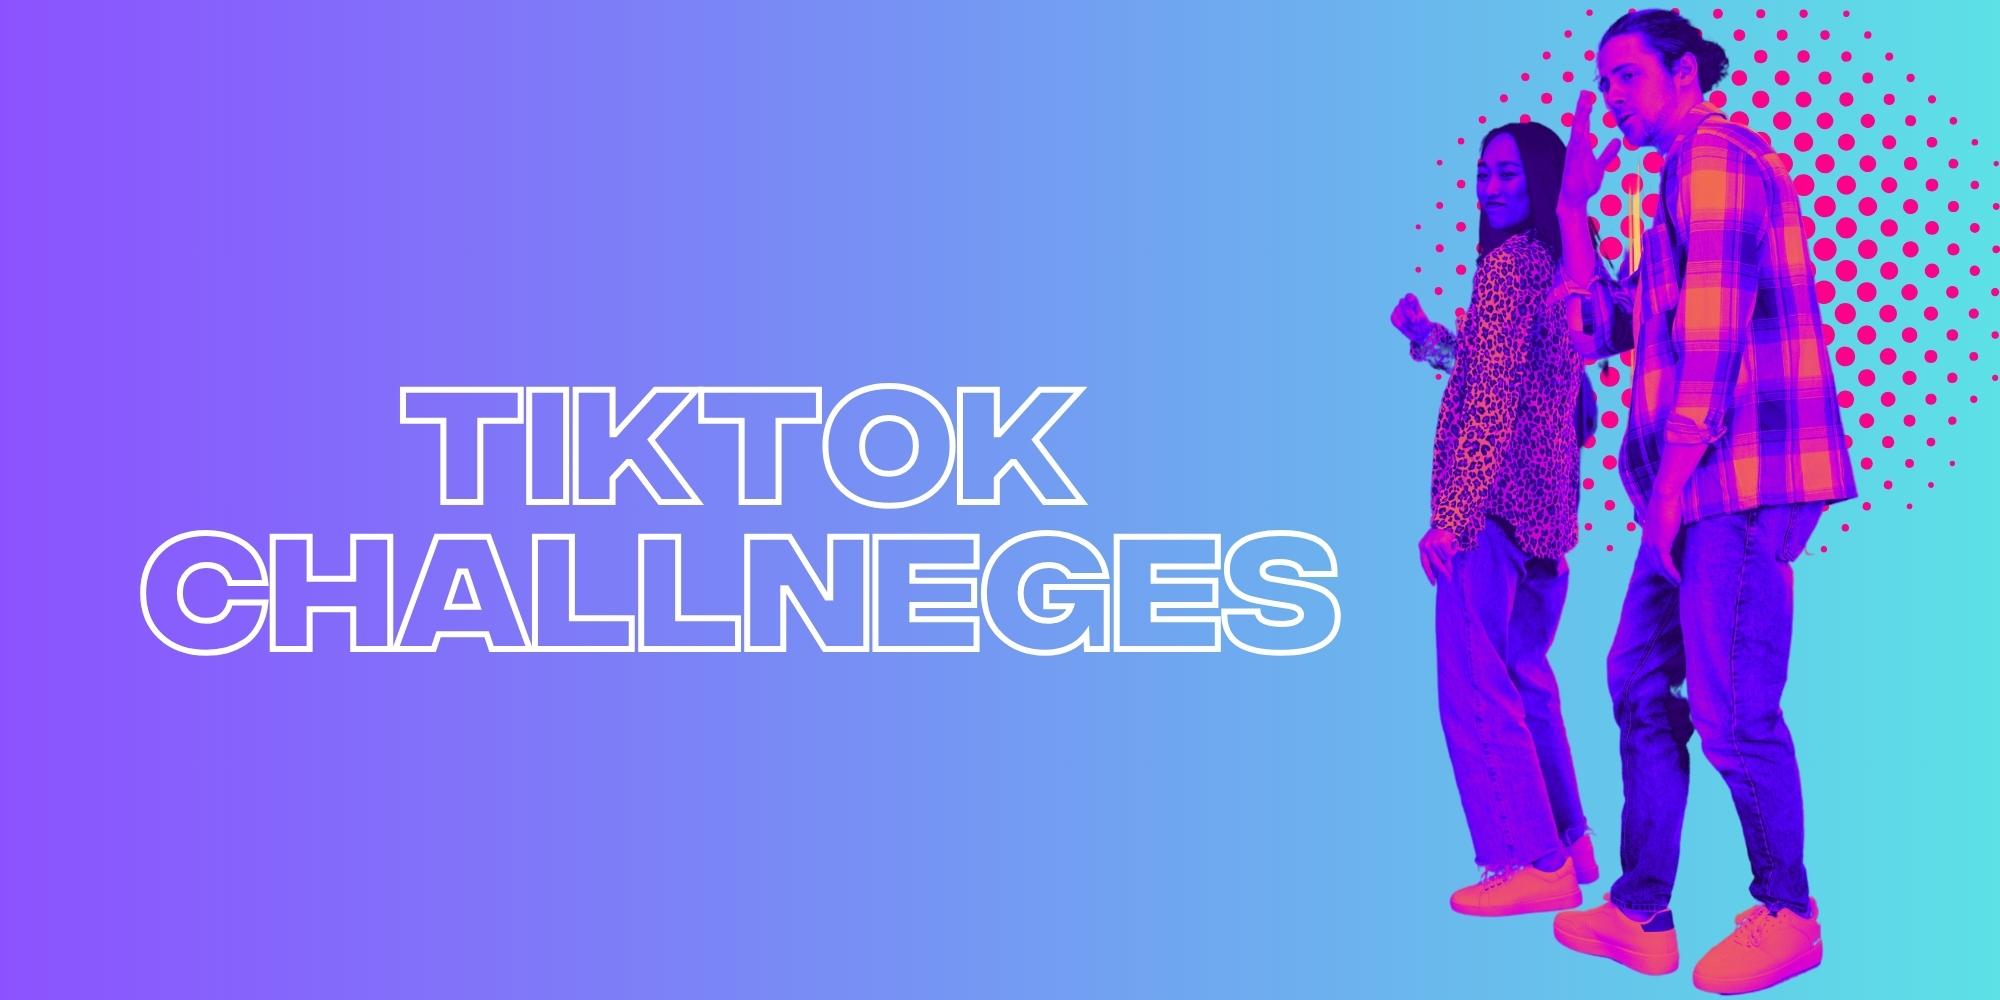 Generate Engagement With These Viral TikTok Challenges